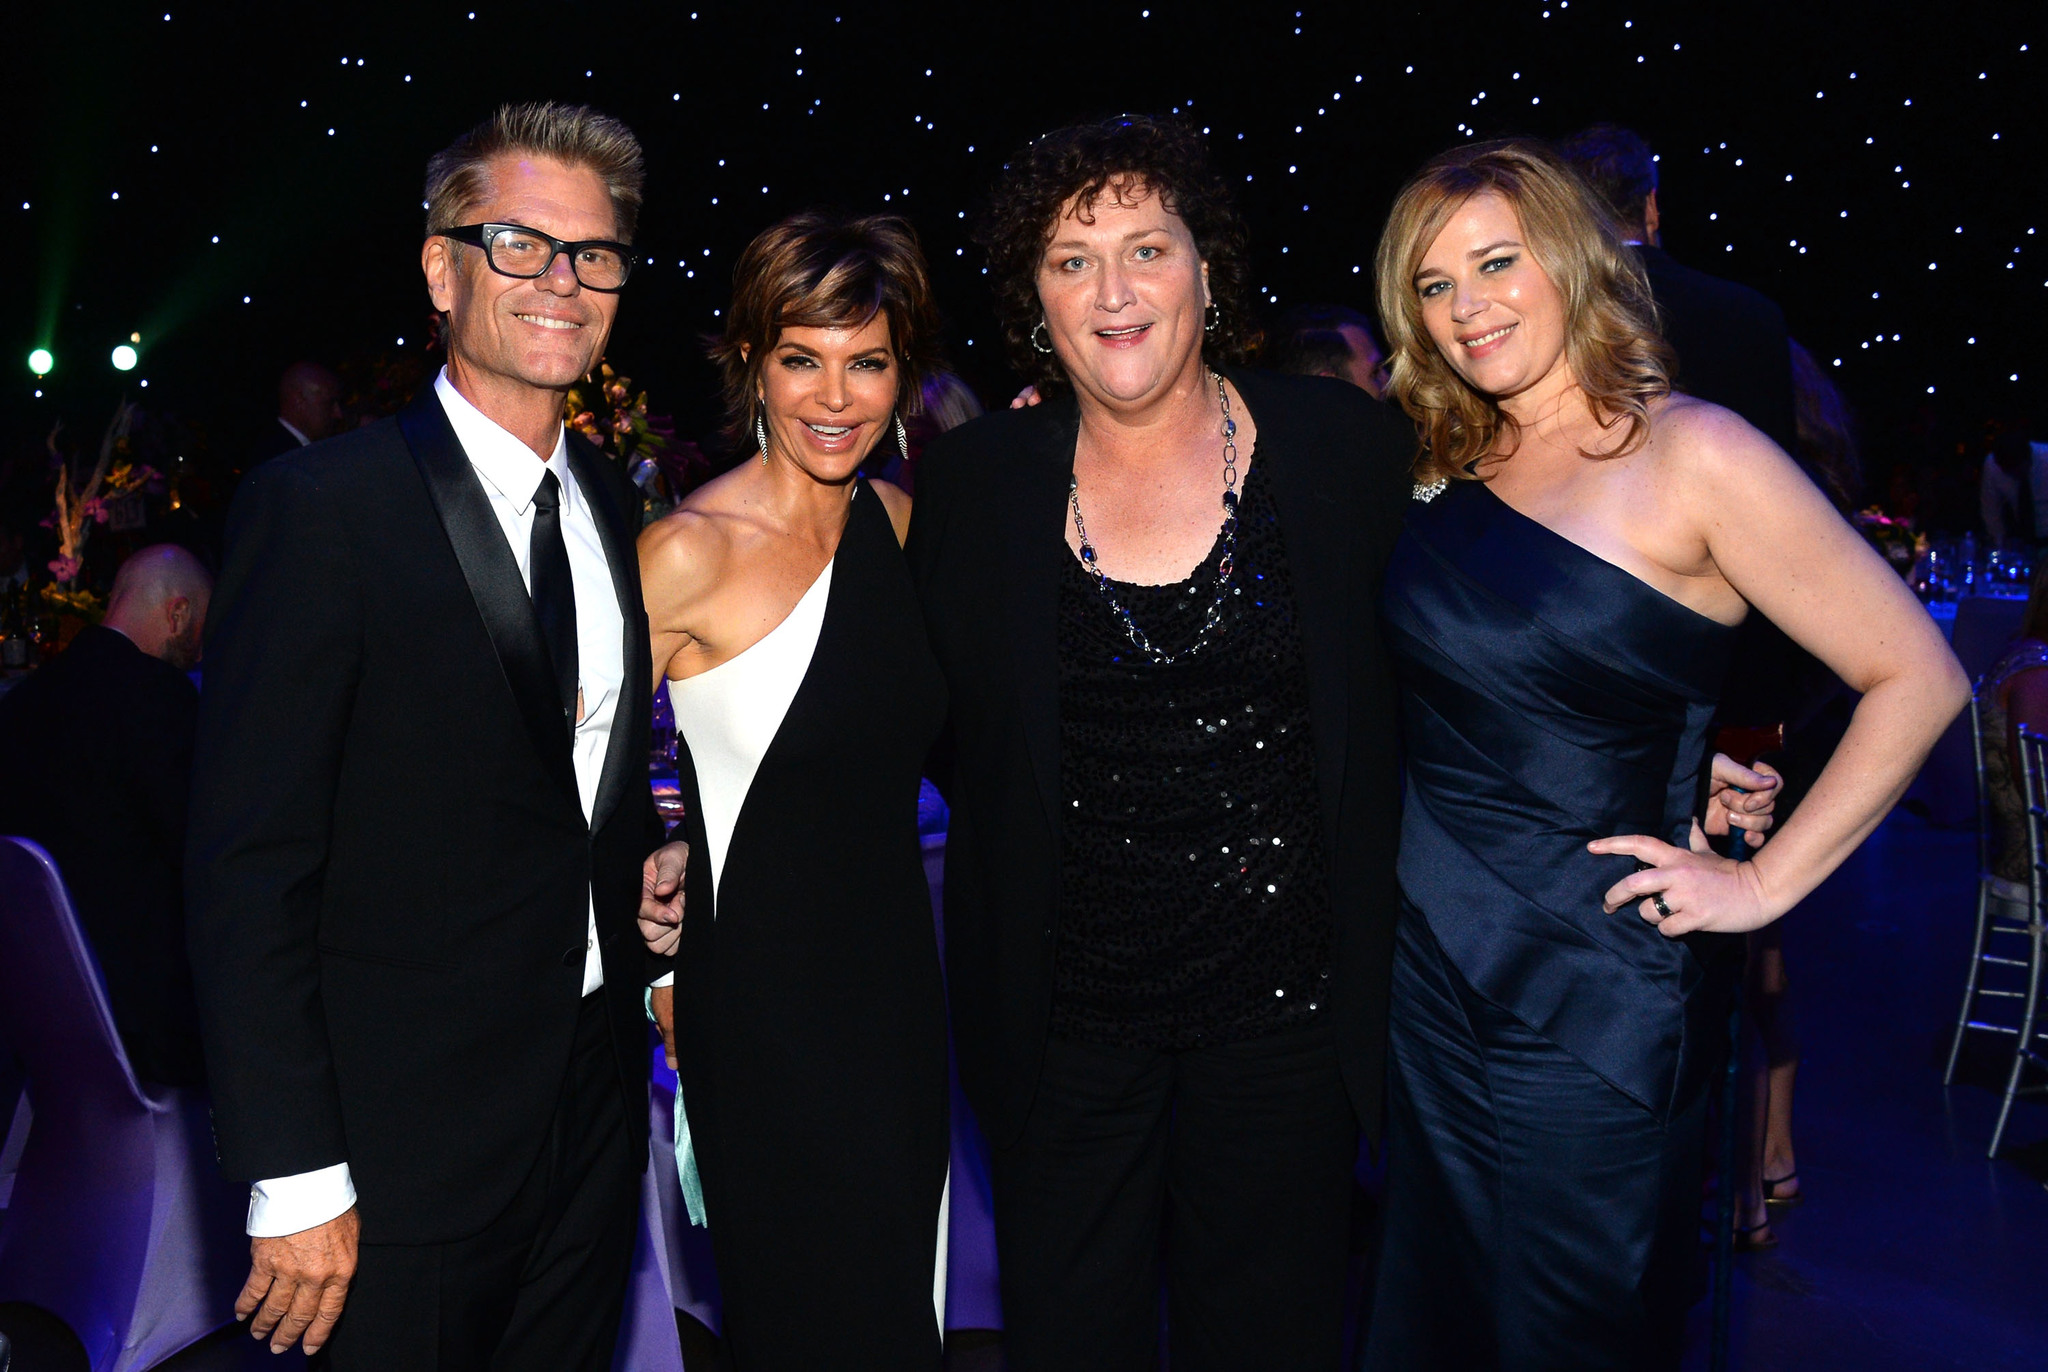 Harry Hamlin, Lisa Rinna, Bridgett Casteen and Dot-Marie Jones pose at the 2013 Creative Arts Emmy Awards Governors Ball held at the Los Angeles Convention Center on September 15, 2013 in Los Angeles, California.